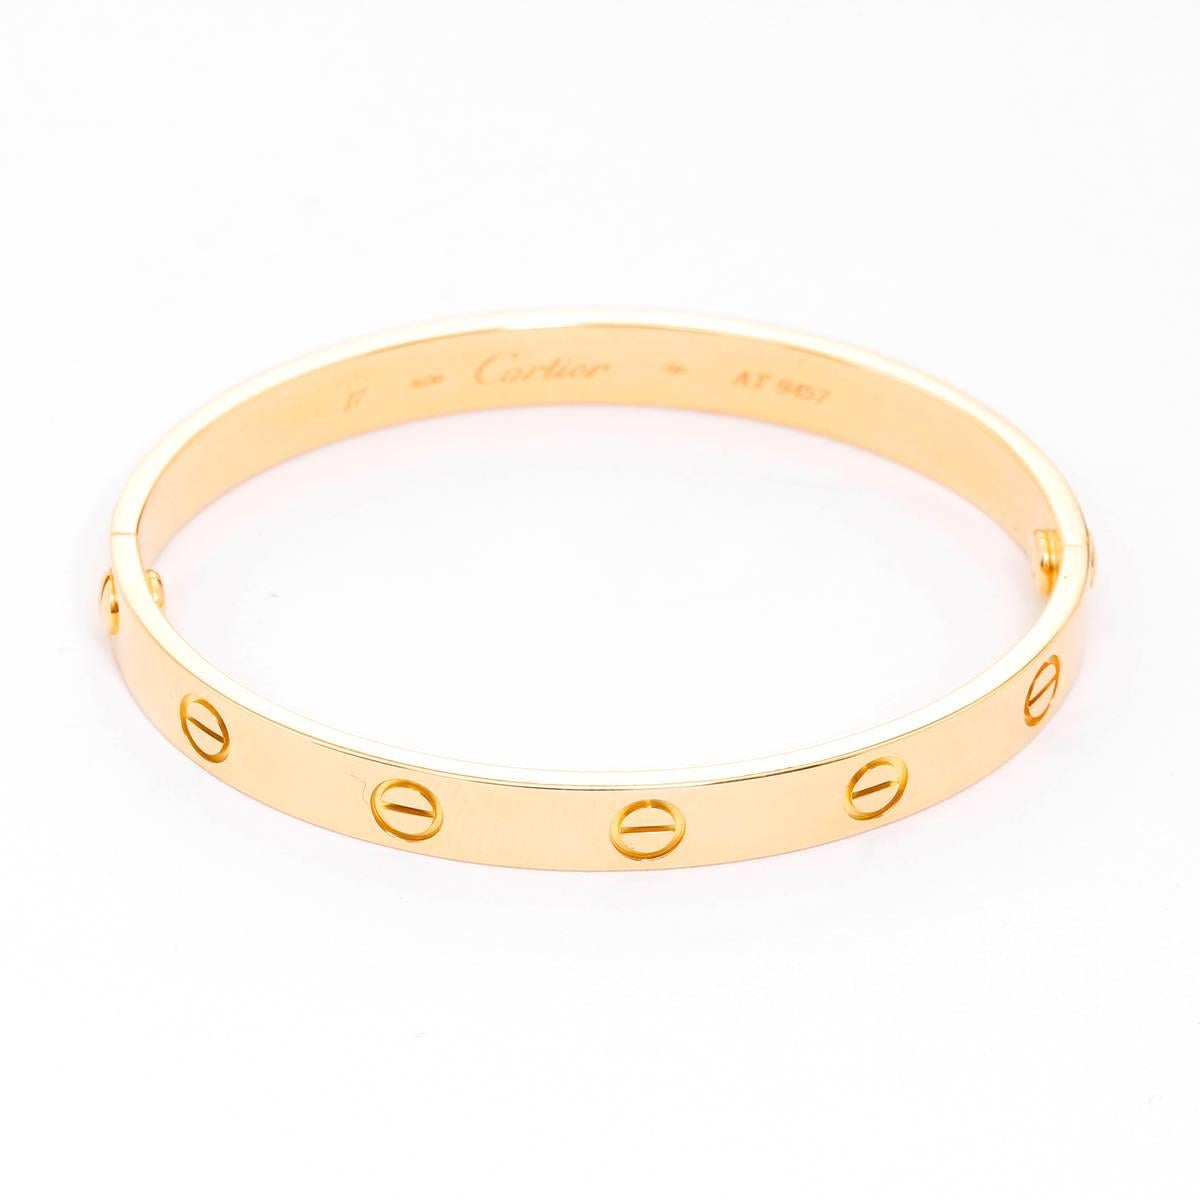 Cartier Love Bracelet 18k Yellow Gold Size 17 with Screwdriver - . This beautiful bracelet is stamped Cartier, 18, 750  and AT9457.  This is a great piece for everyday as well as dress. Authenticity guaranteed. Like new condition with no dings or